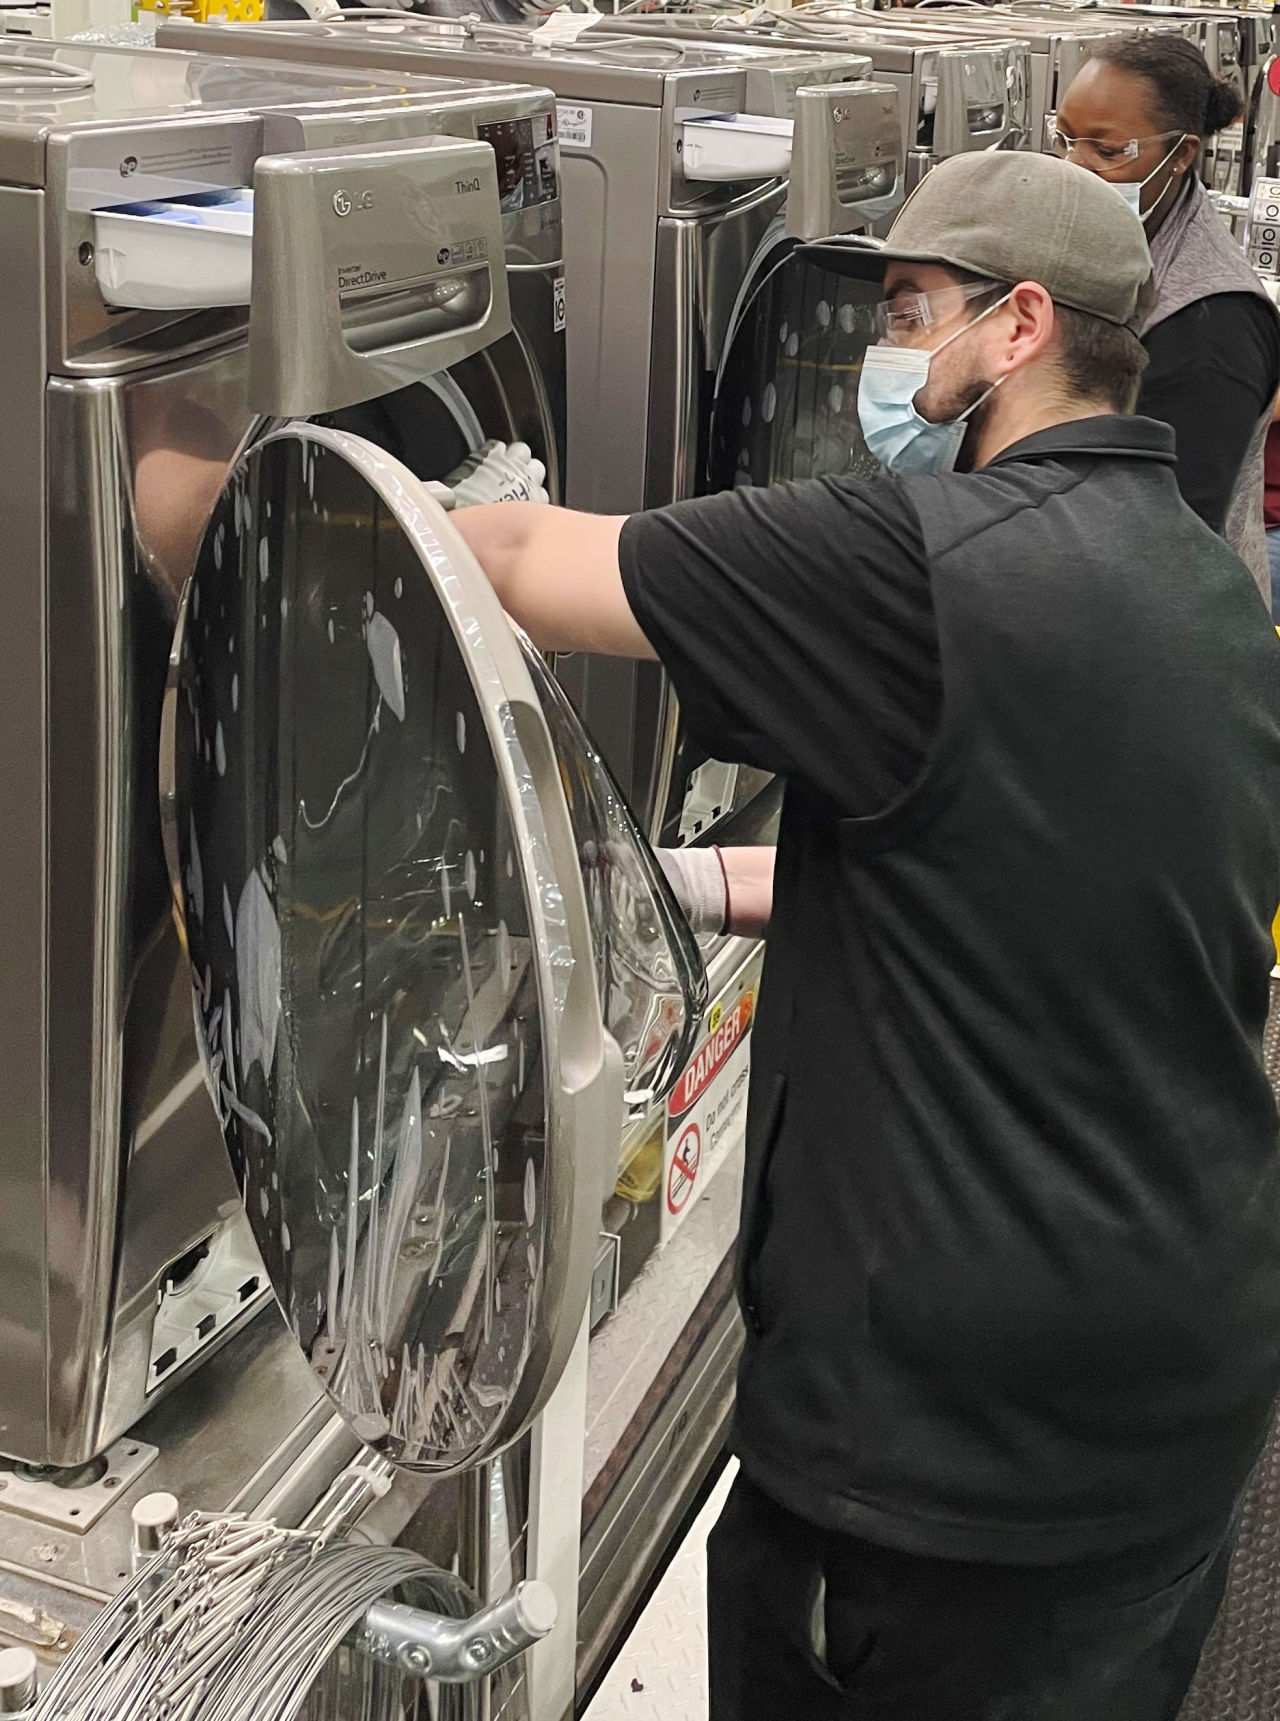 An LG Electronics worker is busy manufacturing washing machines ahead of a year-end spending spree at the firm’s factory in Clarksville, Tennessee, Friday. The company’s lines of key products such as washing machines and refrigerators are running full throttle 24/7 to meet soaring year-end demand in the market.